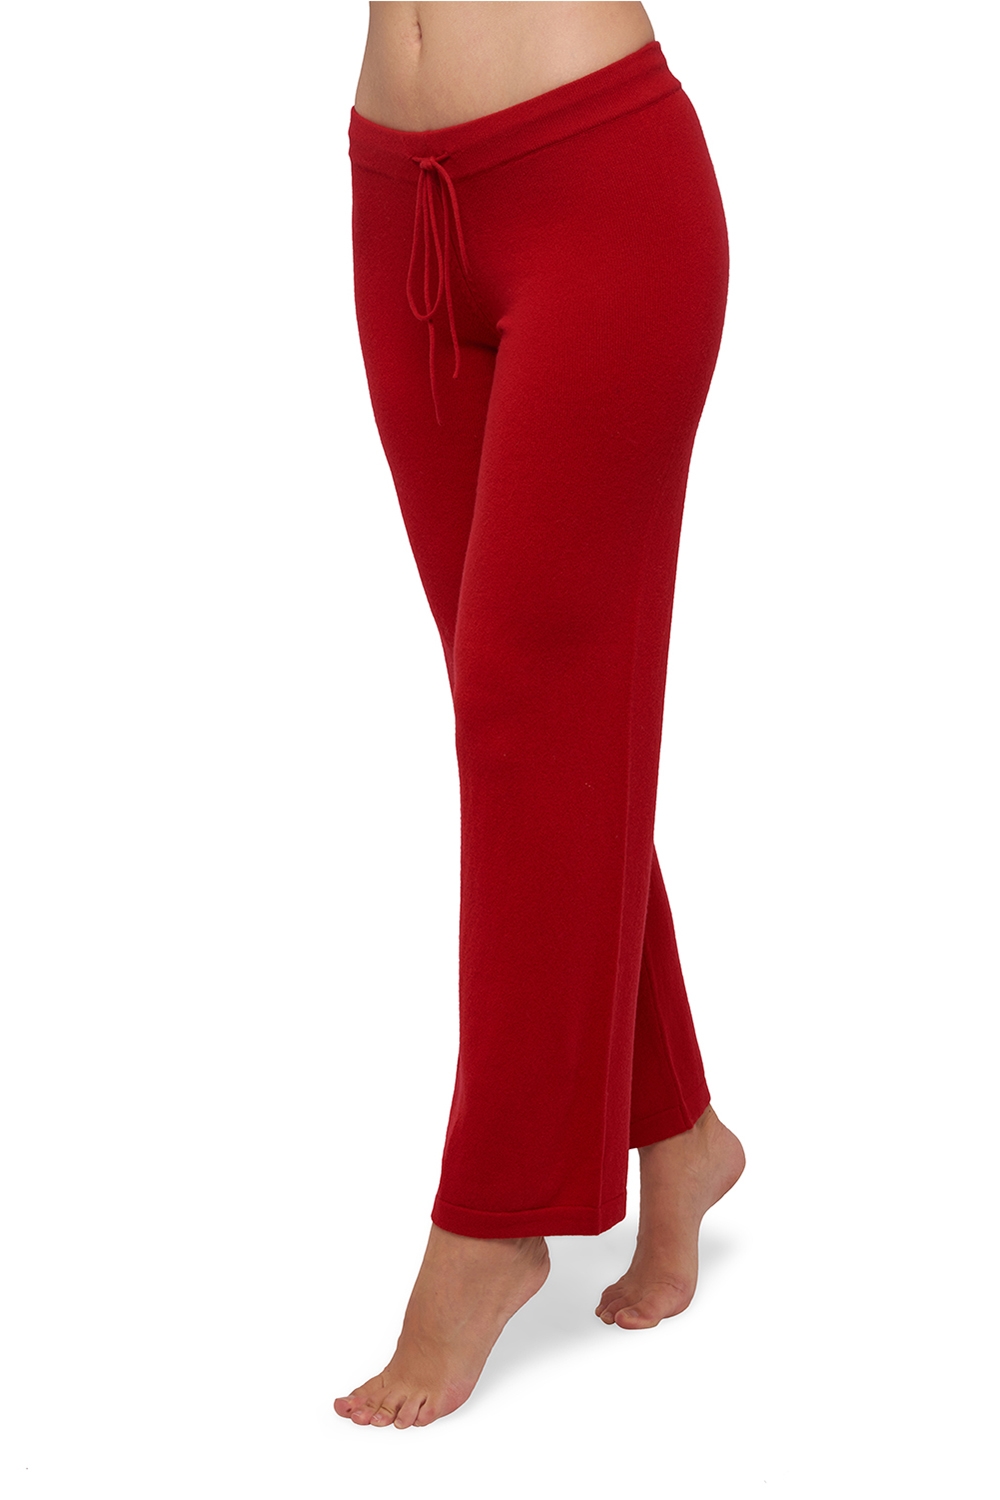 Cashmere ladies timeless classics malice blood red 4xl